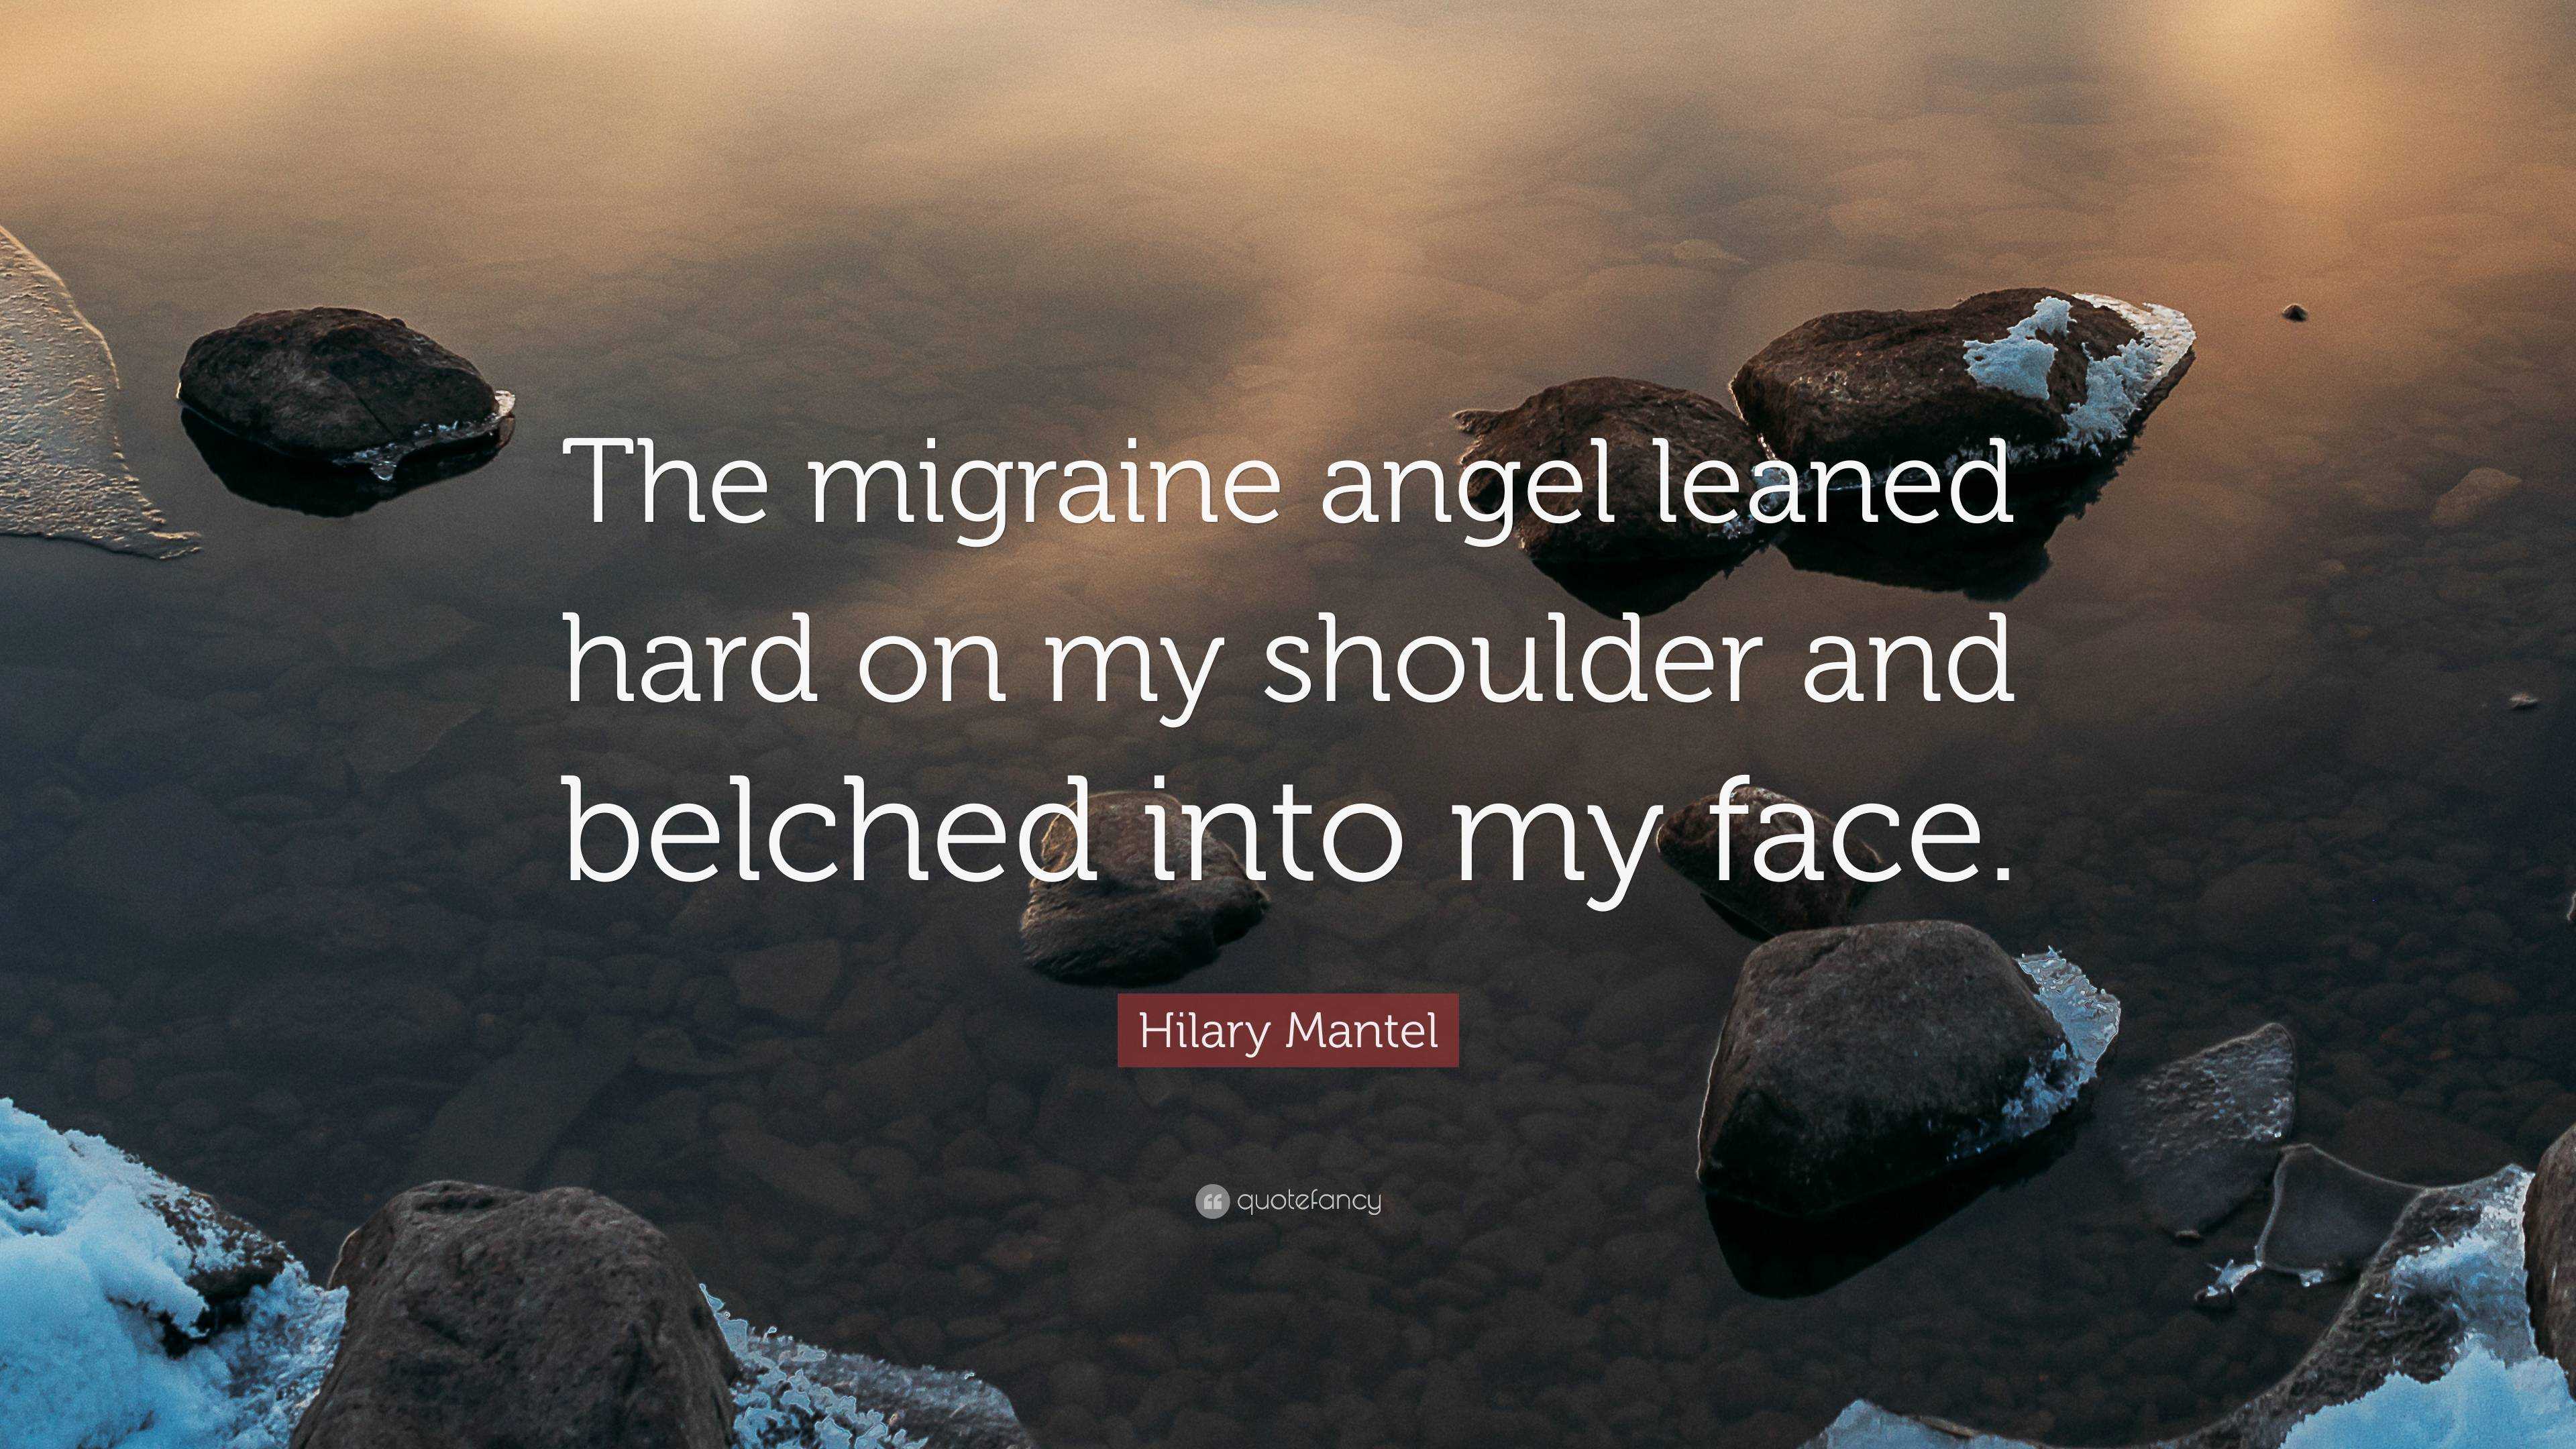 Hilary Mantel Quote: “The Migraine Angel Leaned Hard On My Shoulder And Belched Into My Face.”